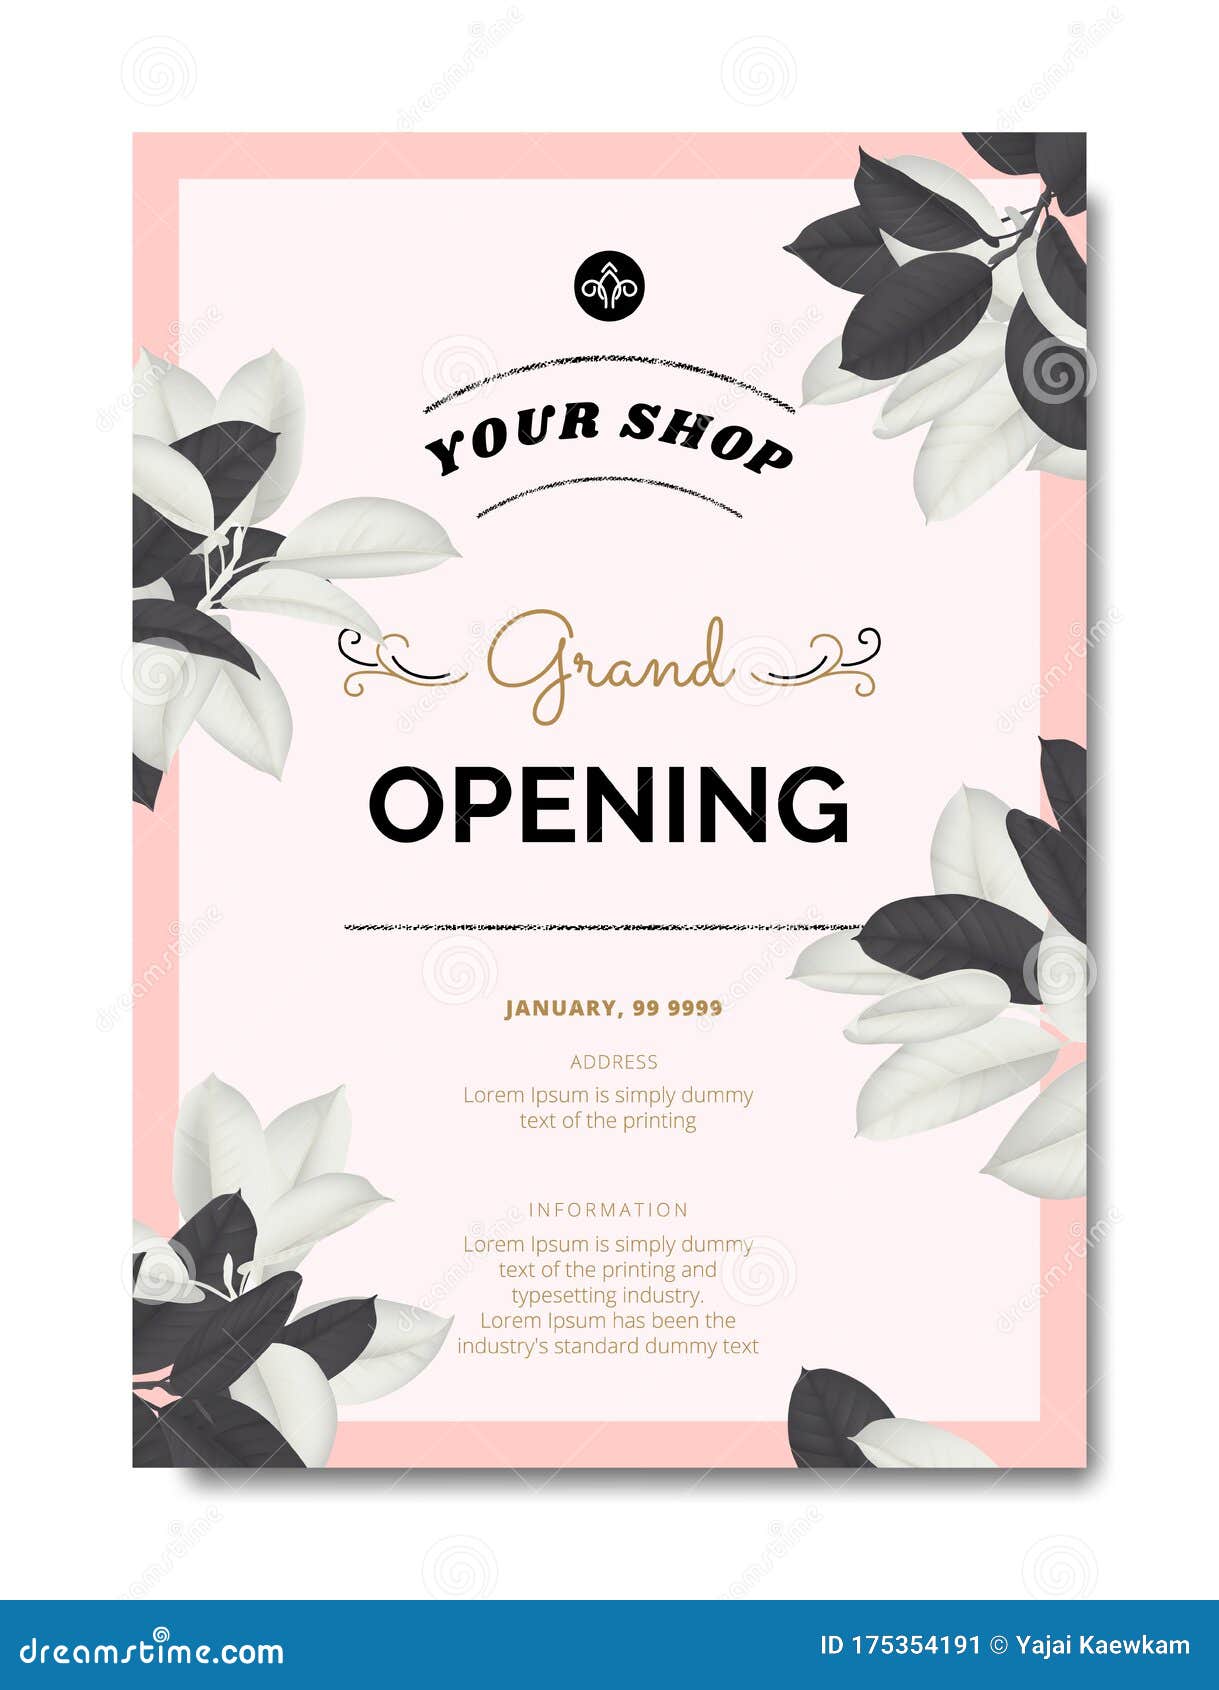 Botanical Grand Opening Invitation Card Template Design Black And White Ficus Elastica Rubber Plant On Pink Background Stock Vector Illustration Of Bouquet Elastica 175354191